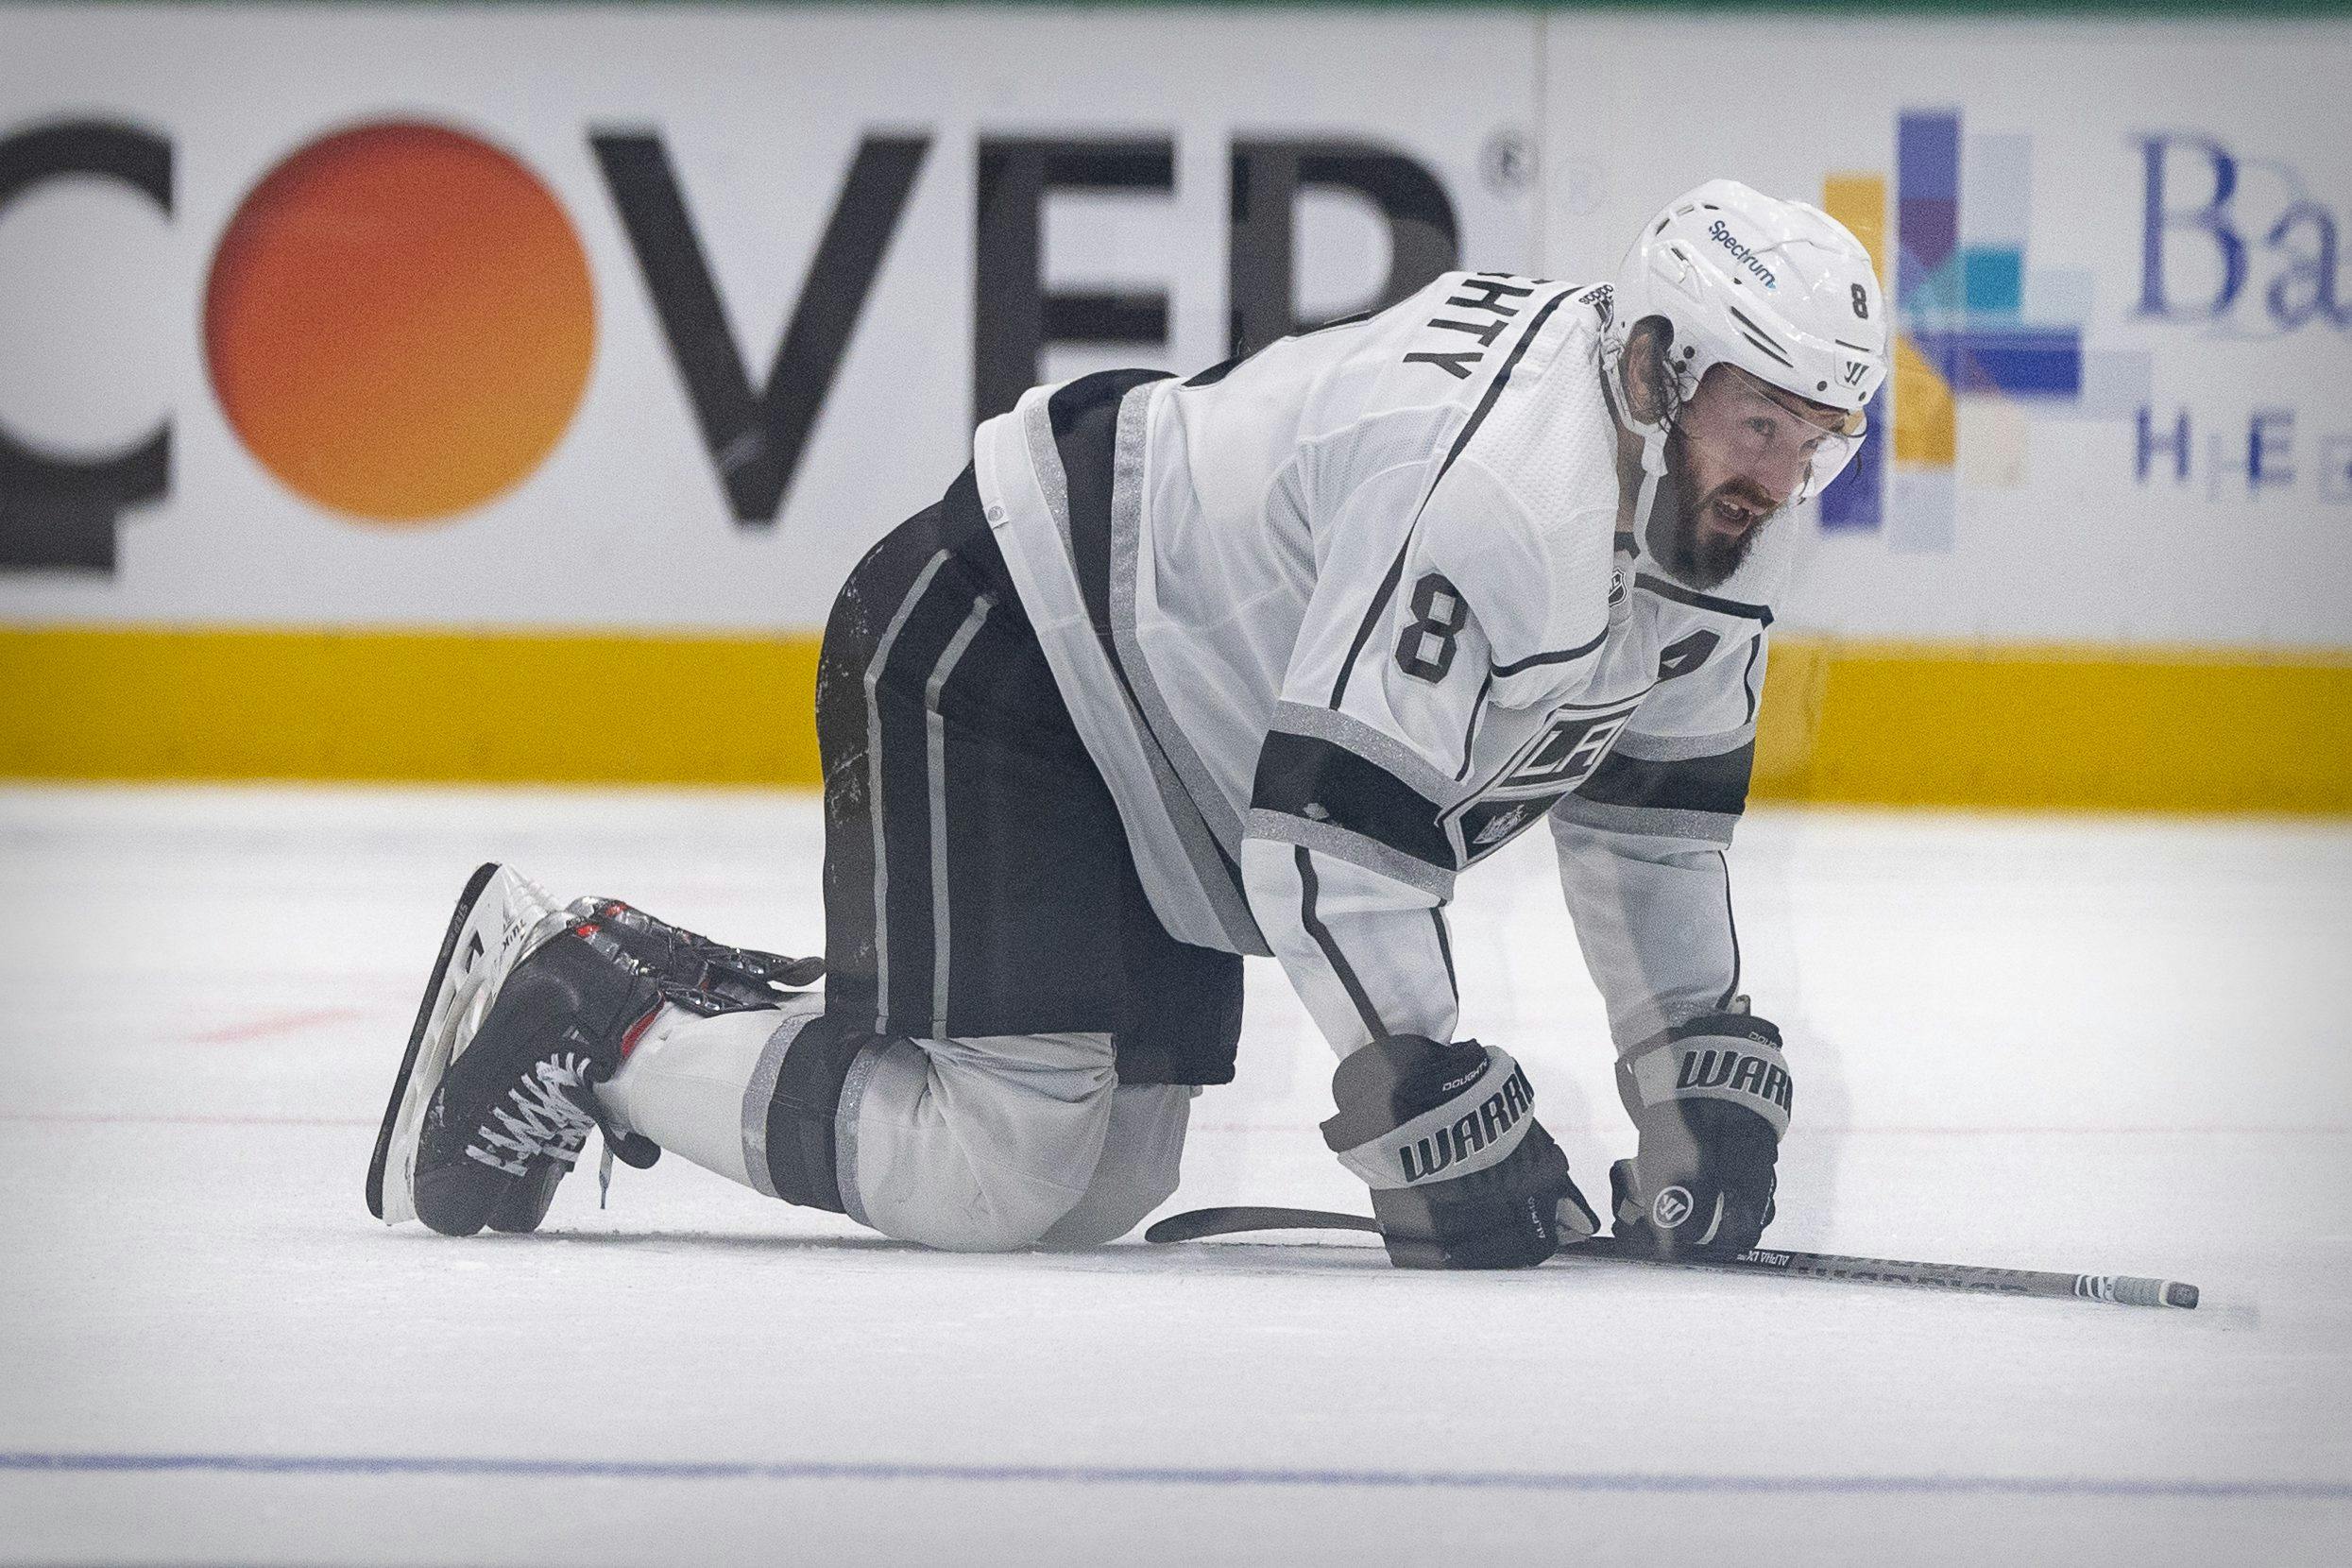 Drew Doughty will miss 6-to-8 weeks due to tibial plateau contusion